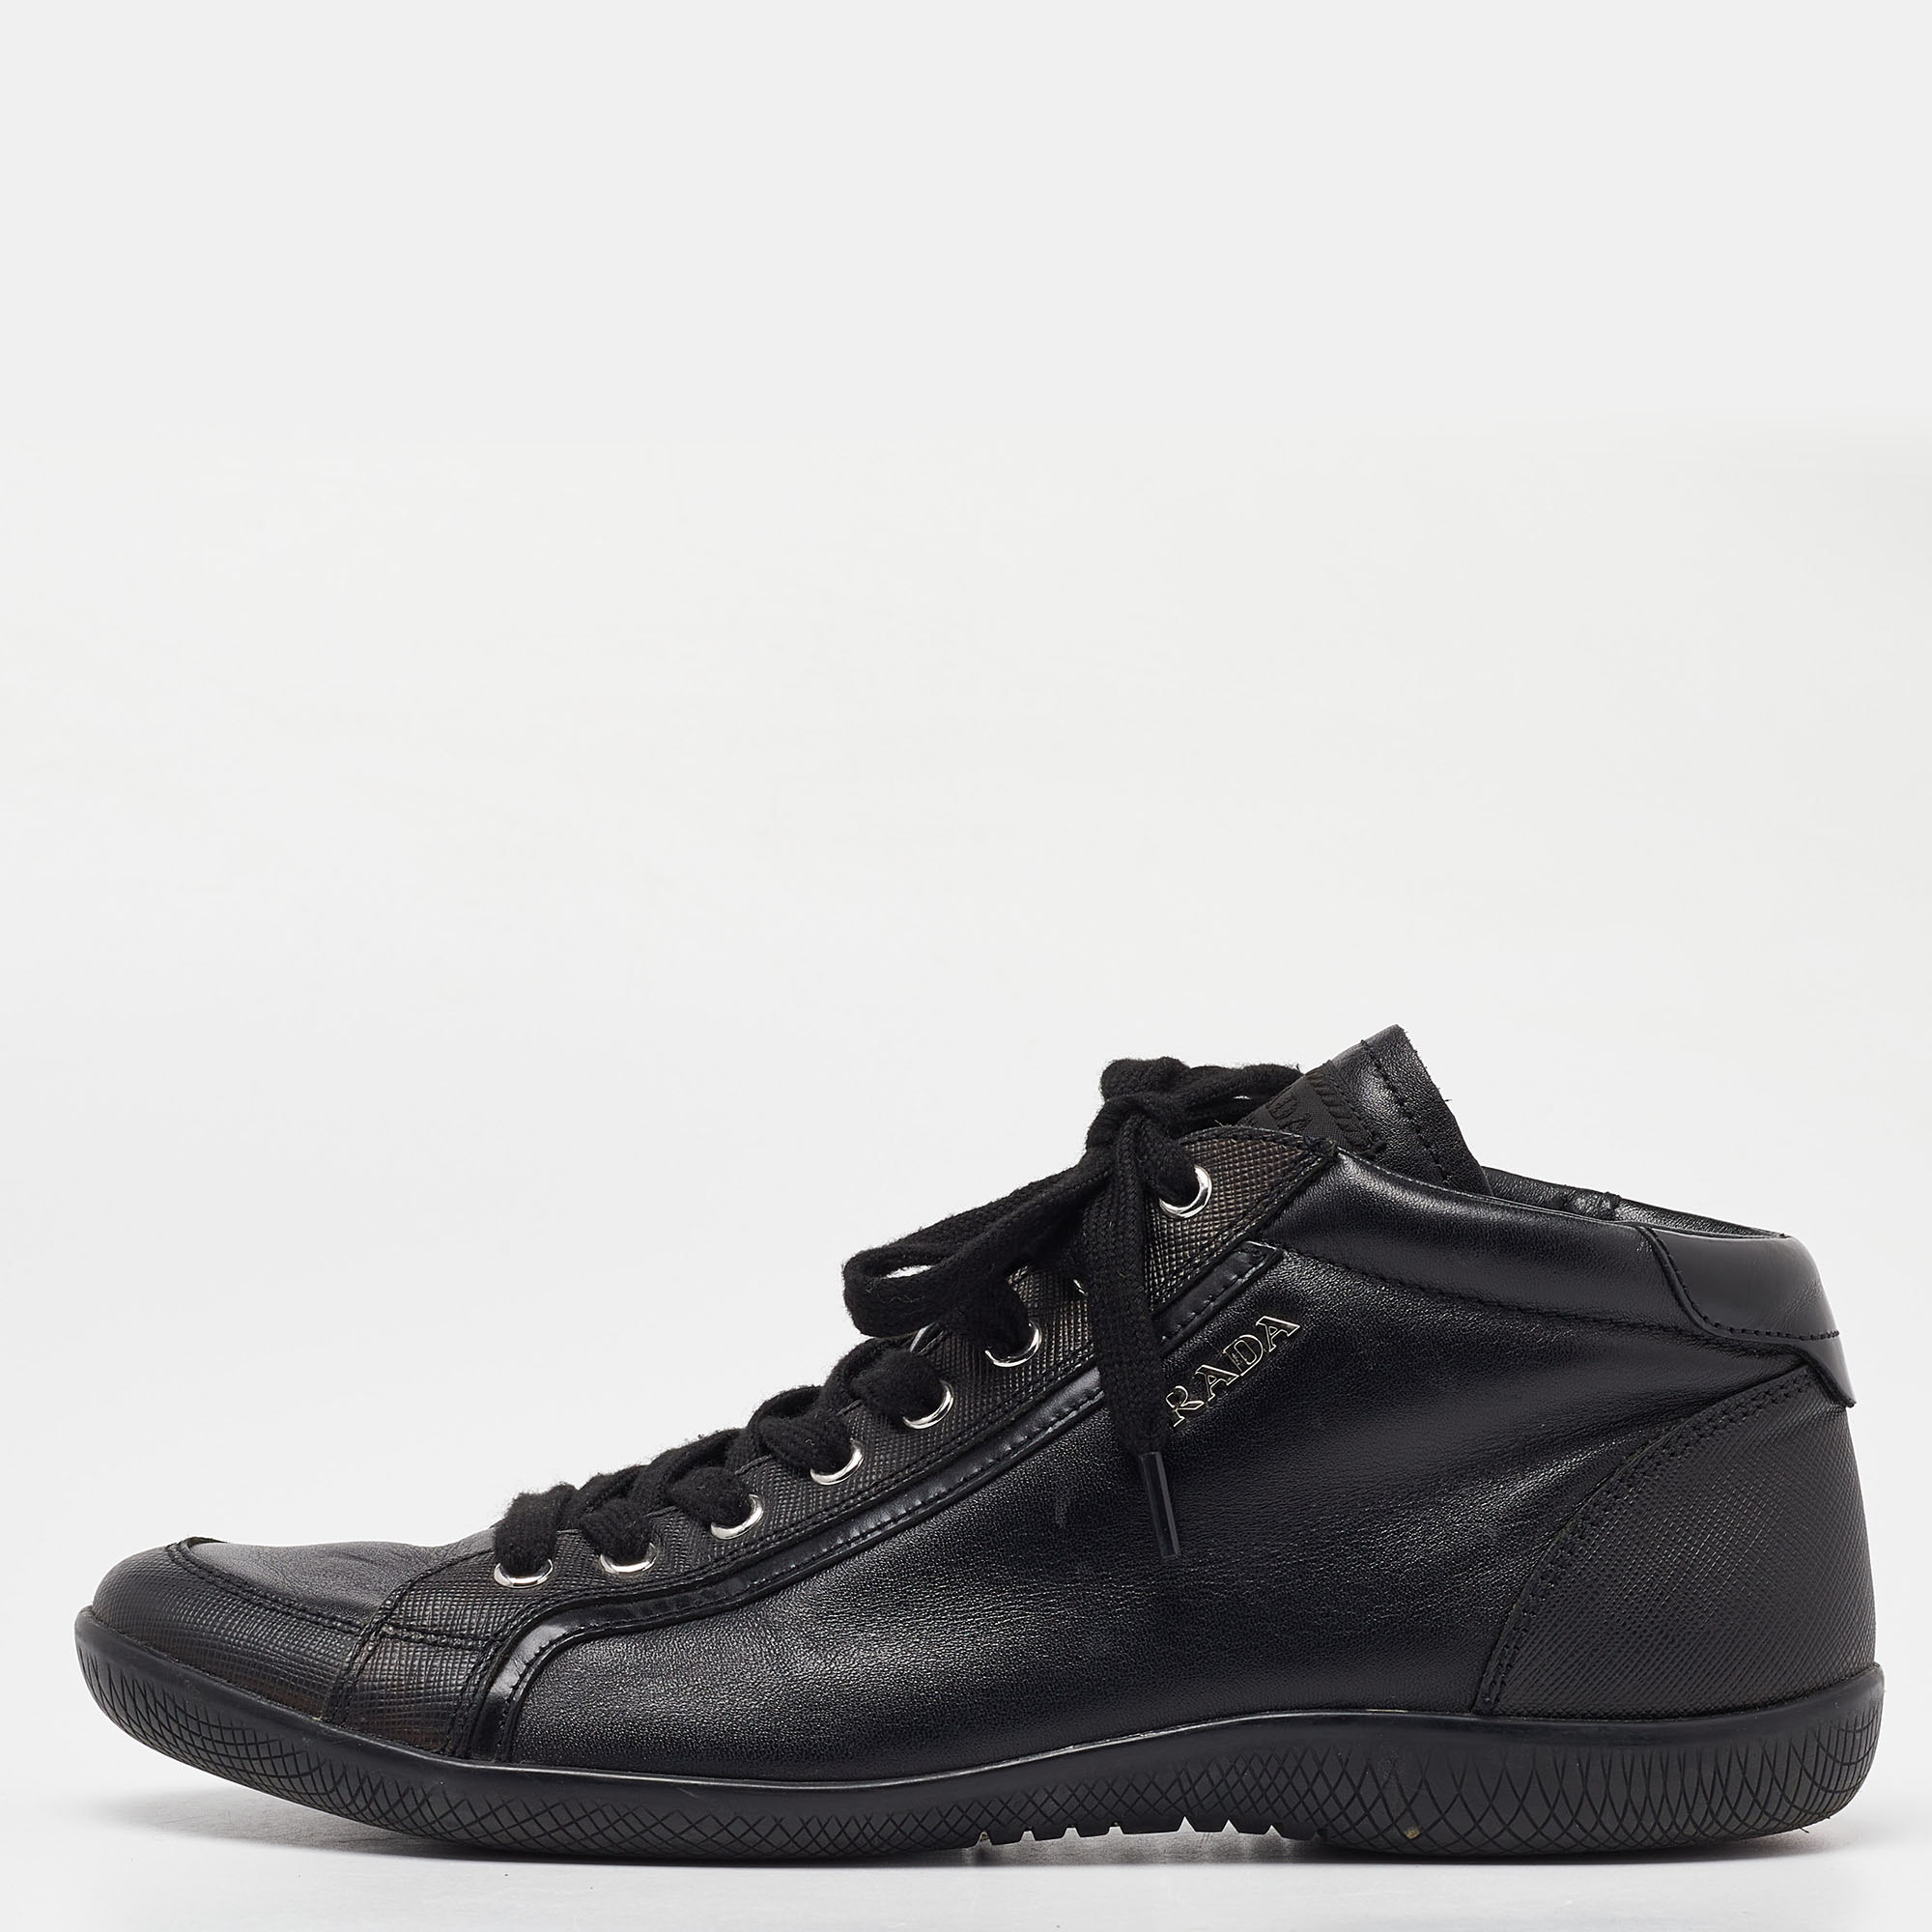 Prada sports black leather high top sneakers size 39